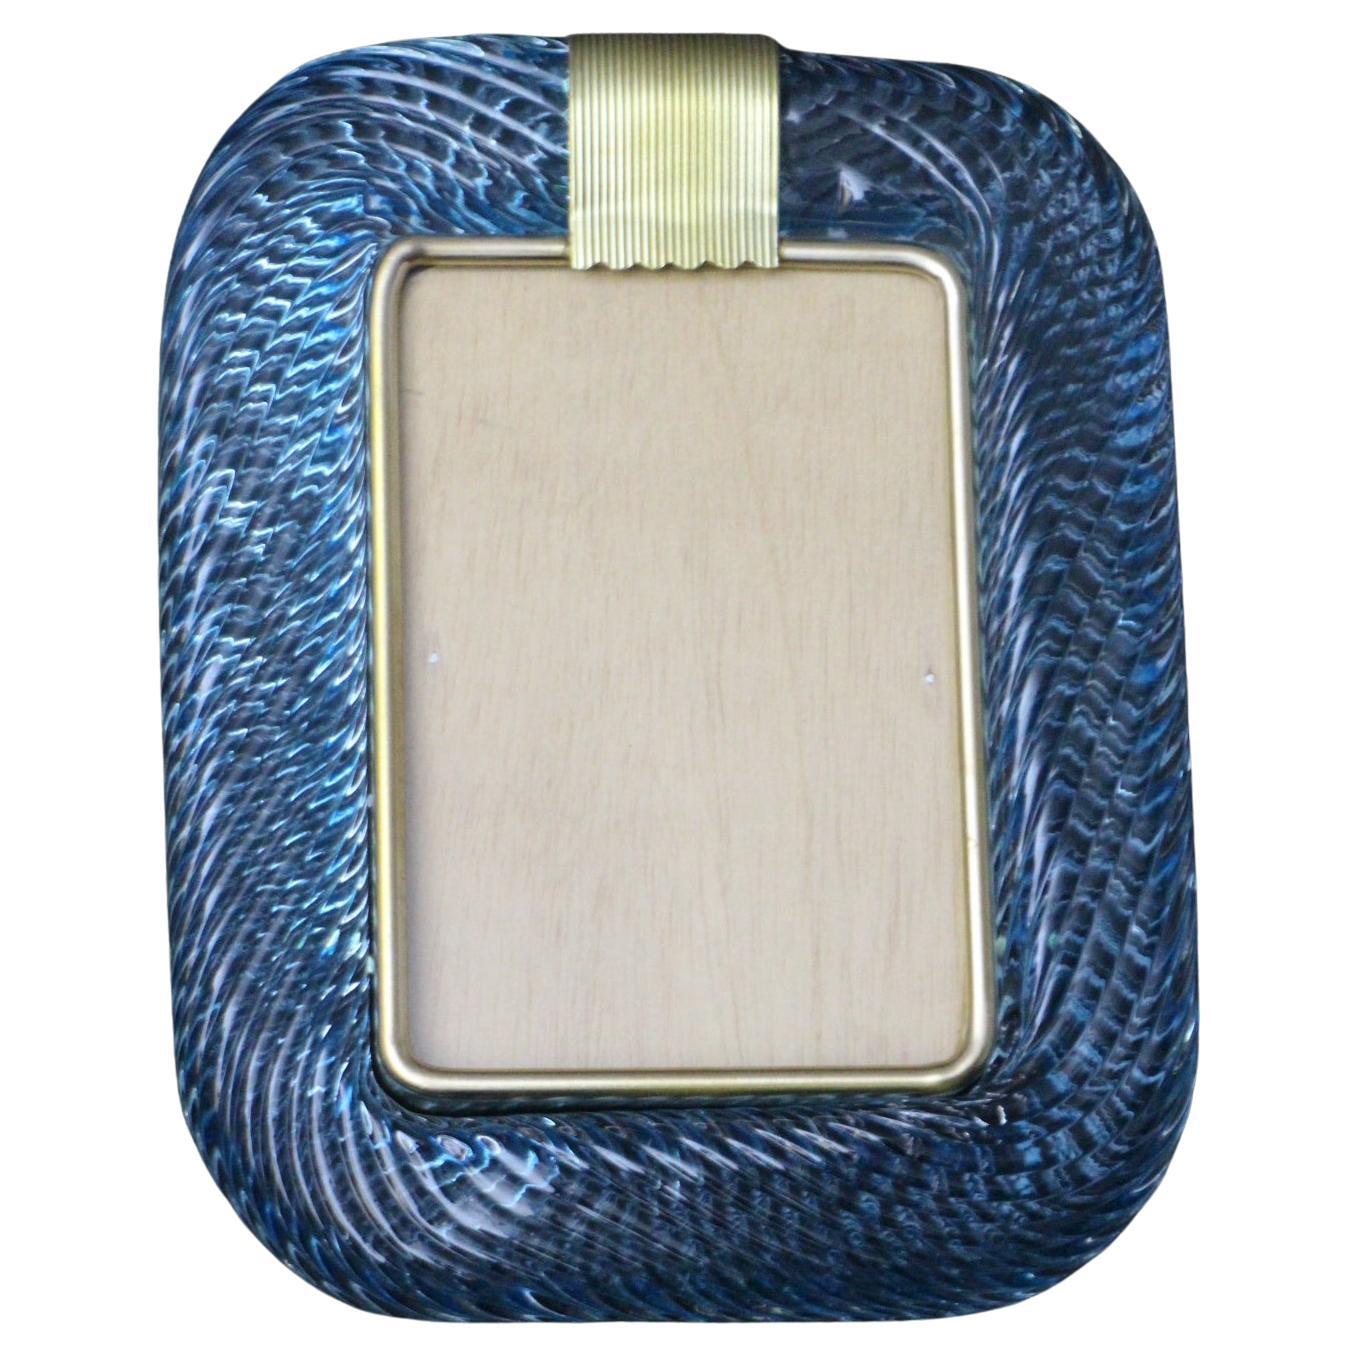 2000's Sky Blue Twisted Murano Glass and Brass Photo Frame by Barovier e Toso For Sale